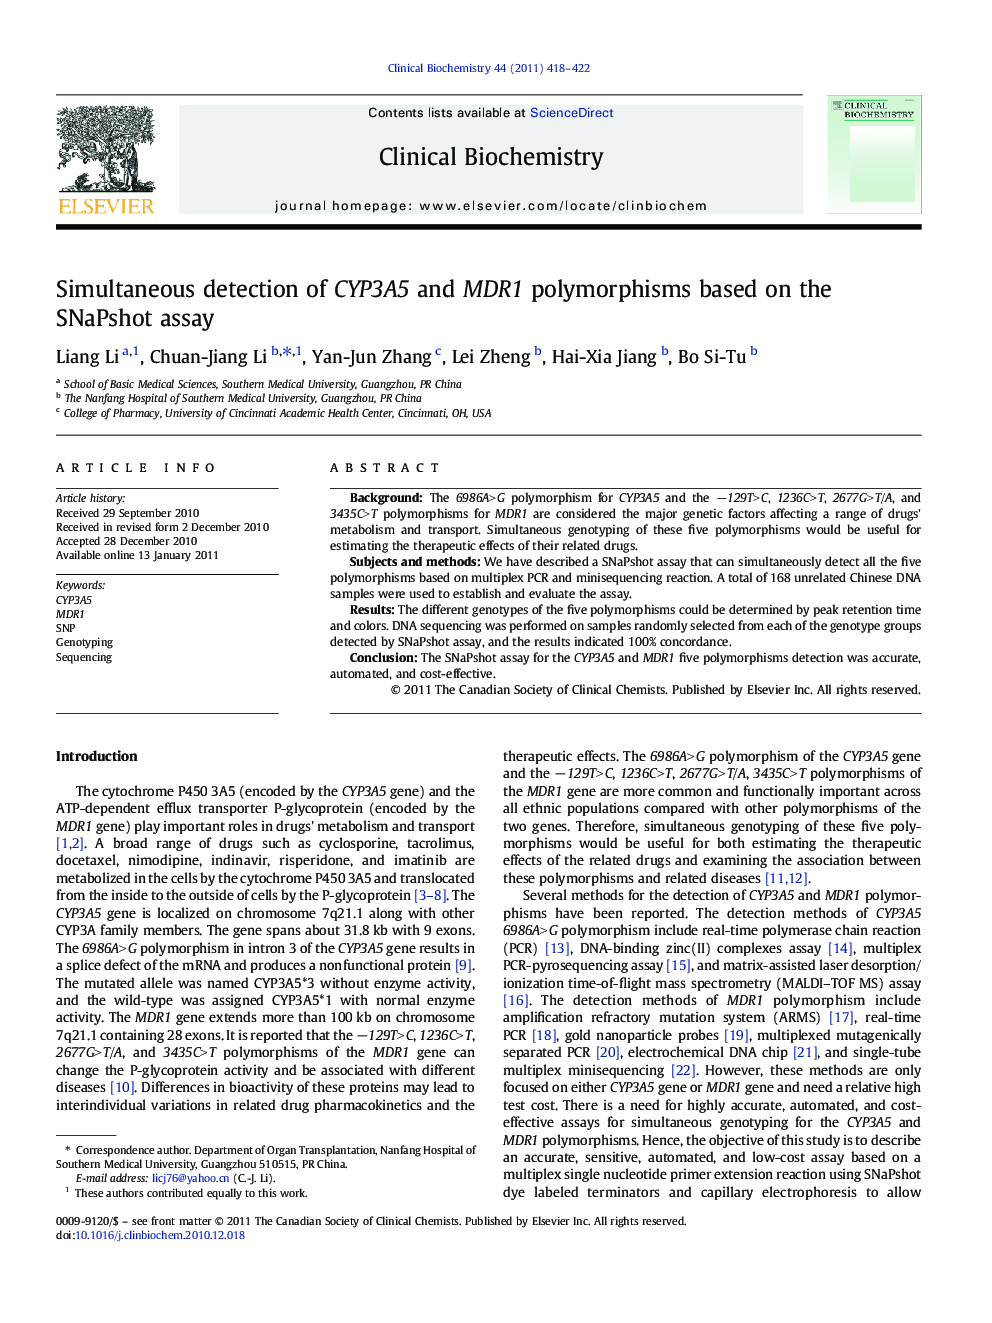 Simultaneous detection of CYP3A5 and MDR1 polymorphisms based on the SNaPshot assay